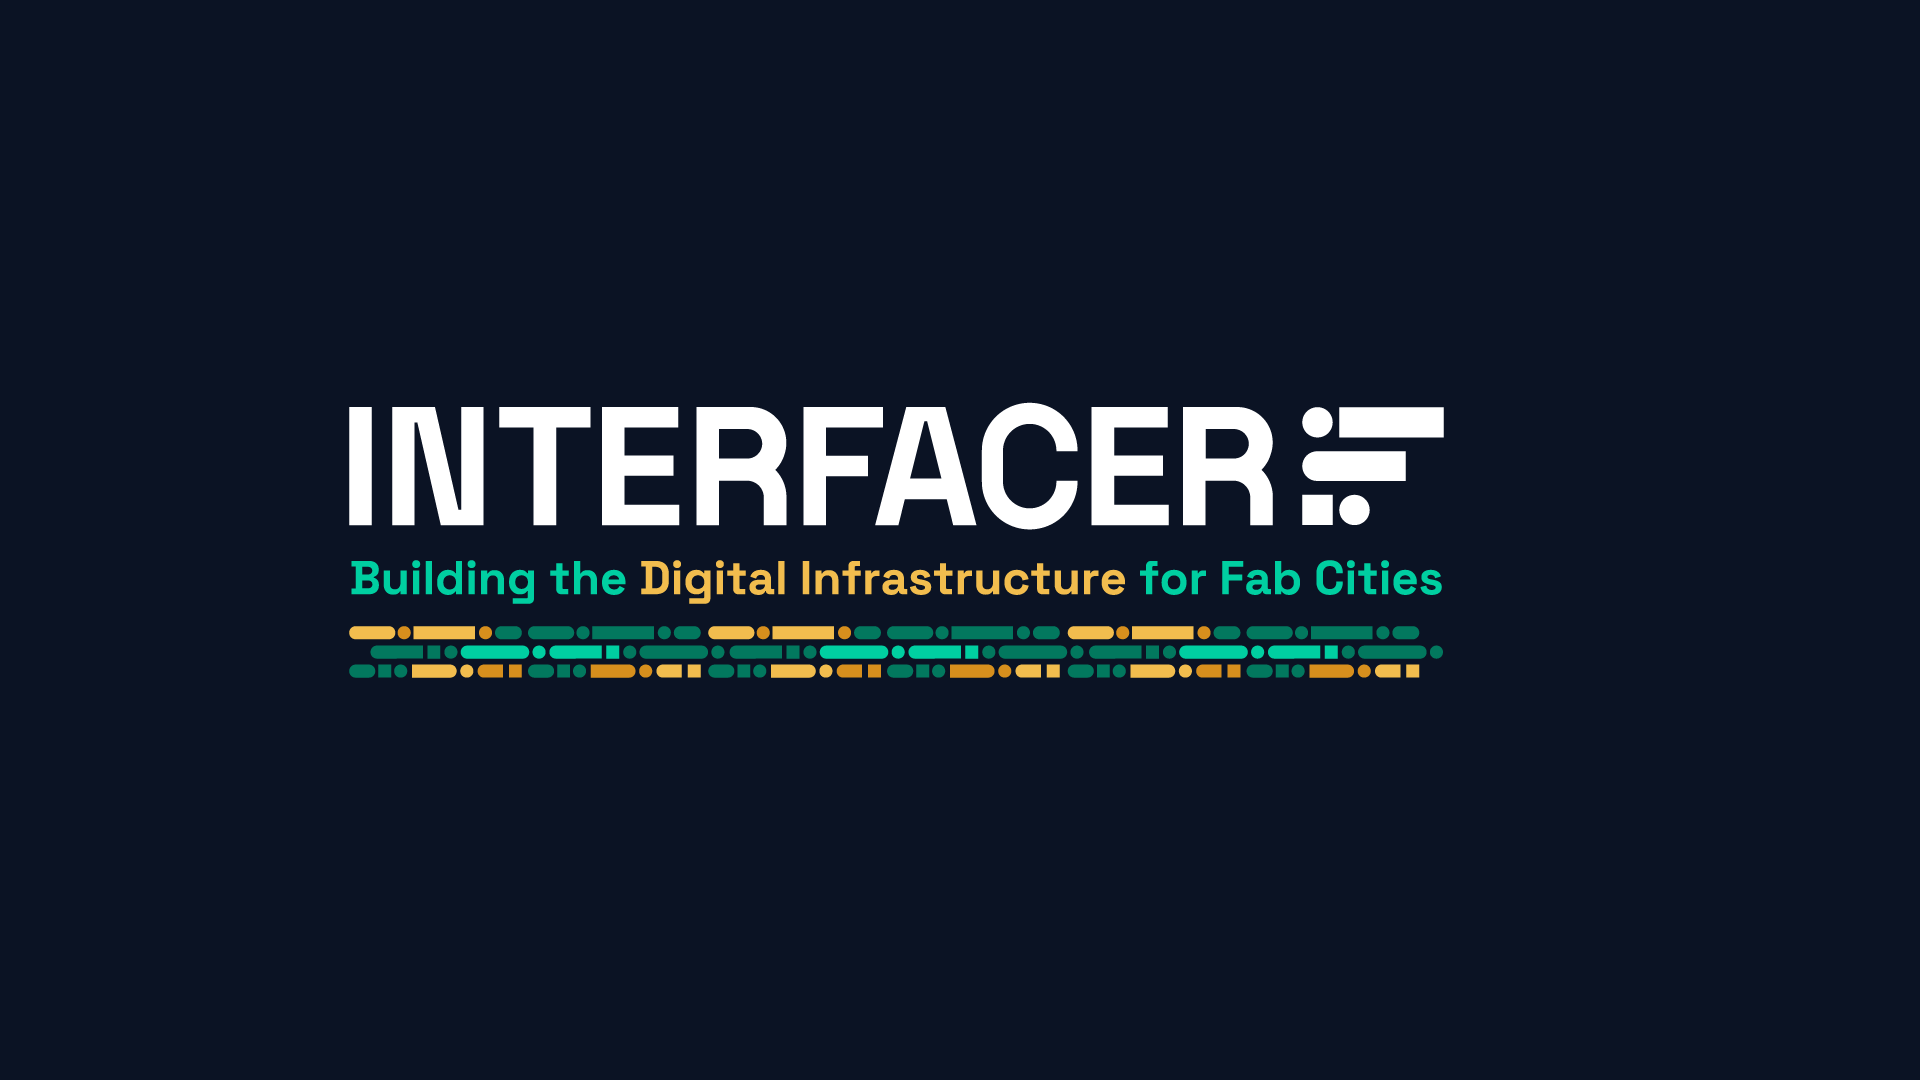 Building a digital infrastructure for fab cities and regions